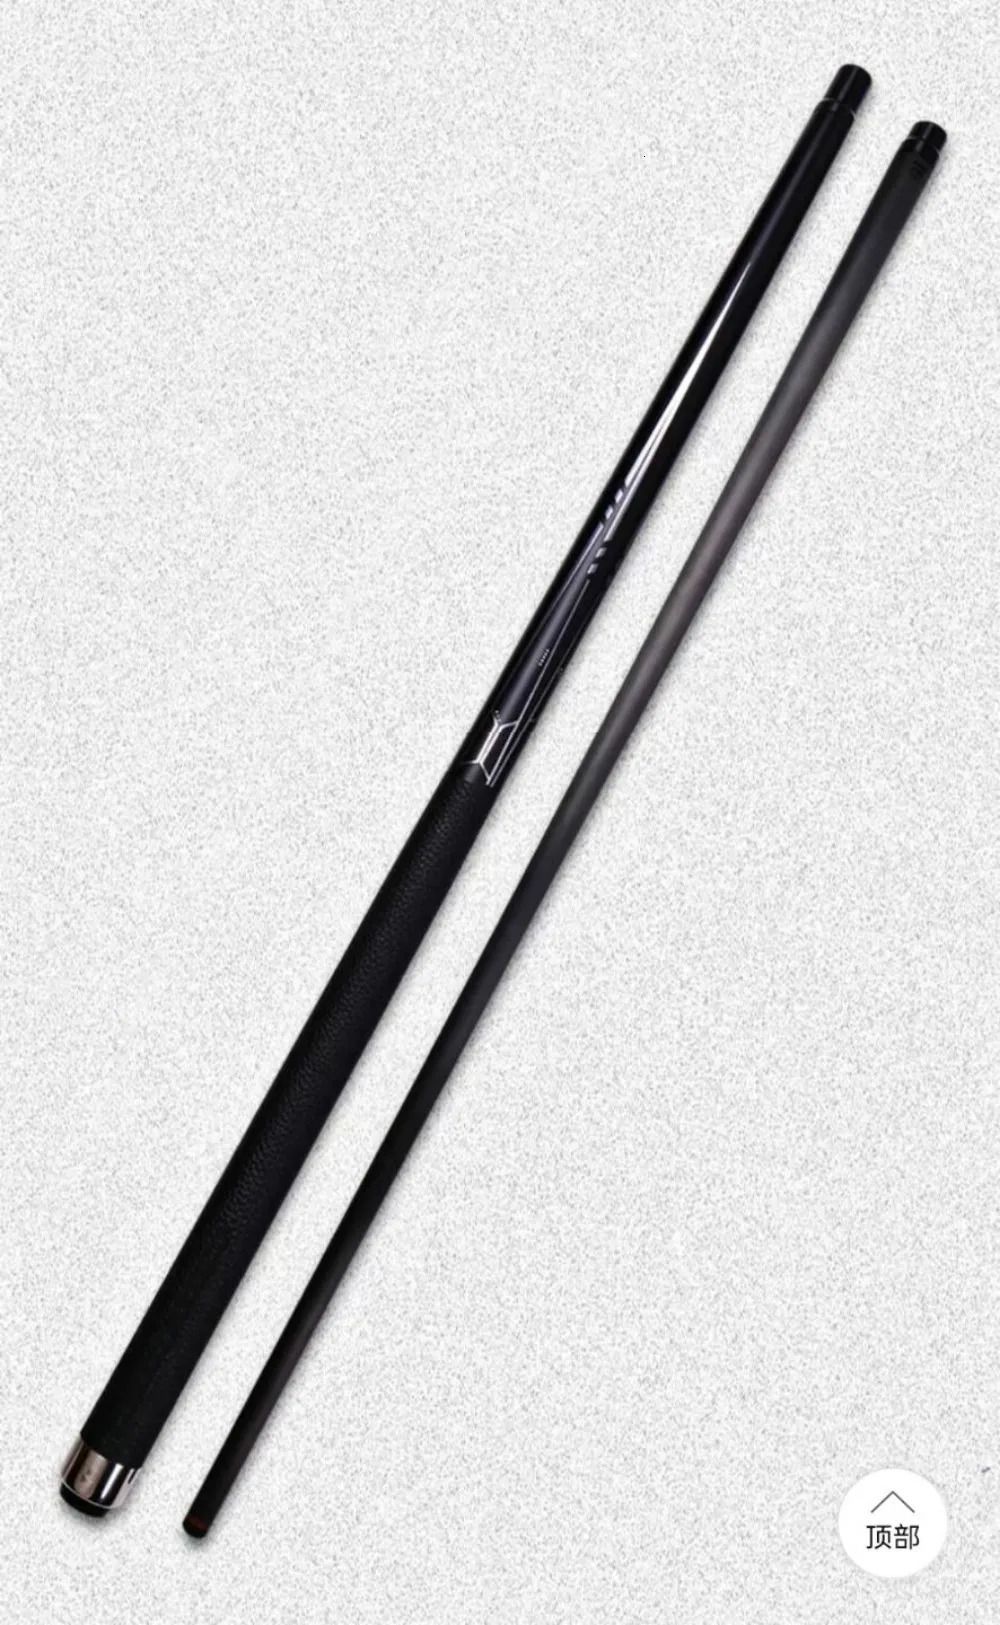 Thunder Silver Cue-12.5mm